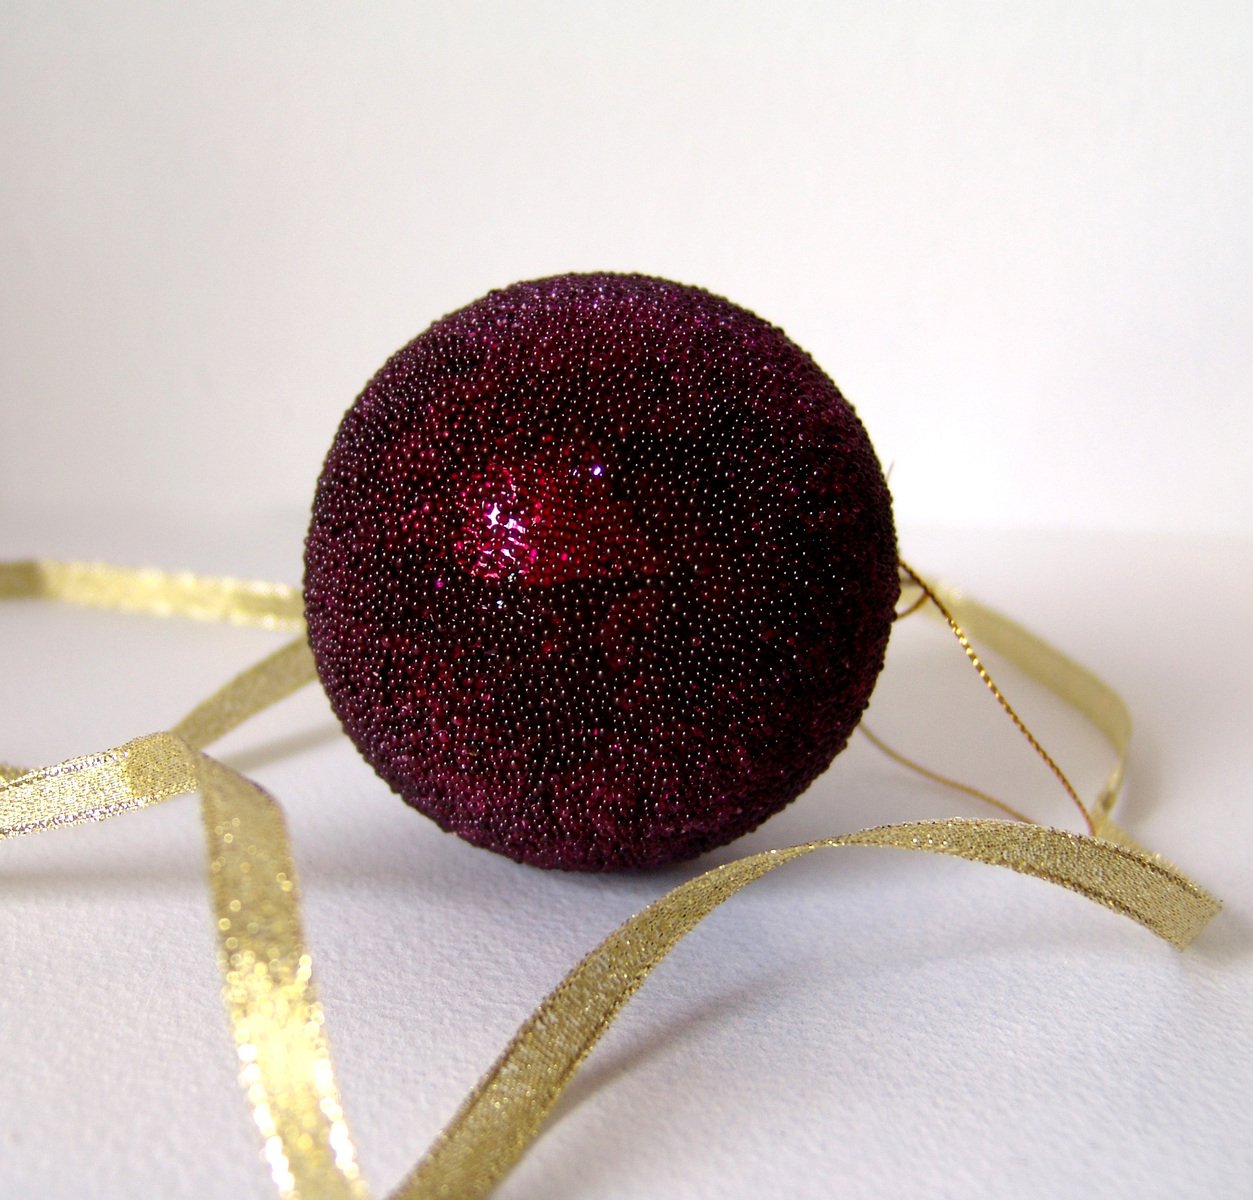 a small red ball that is covered in metallic glitter